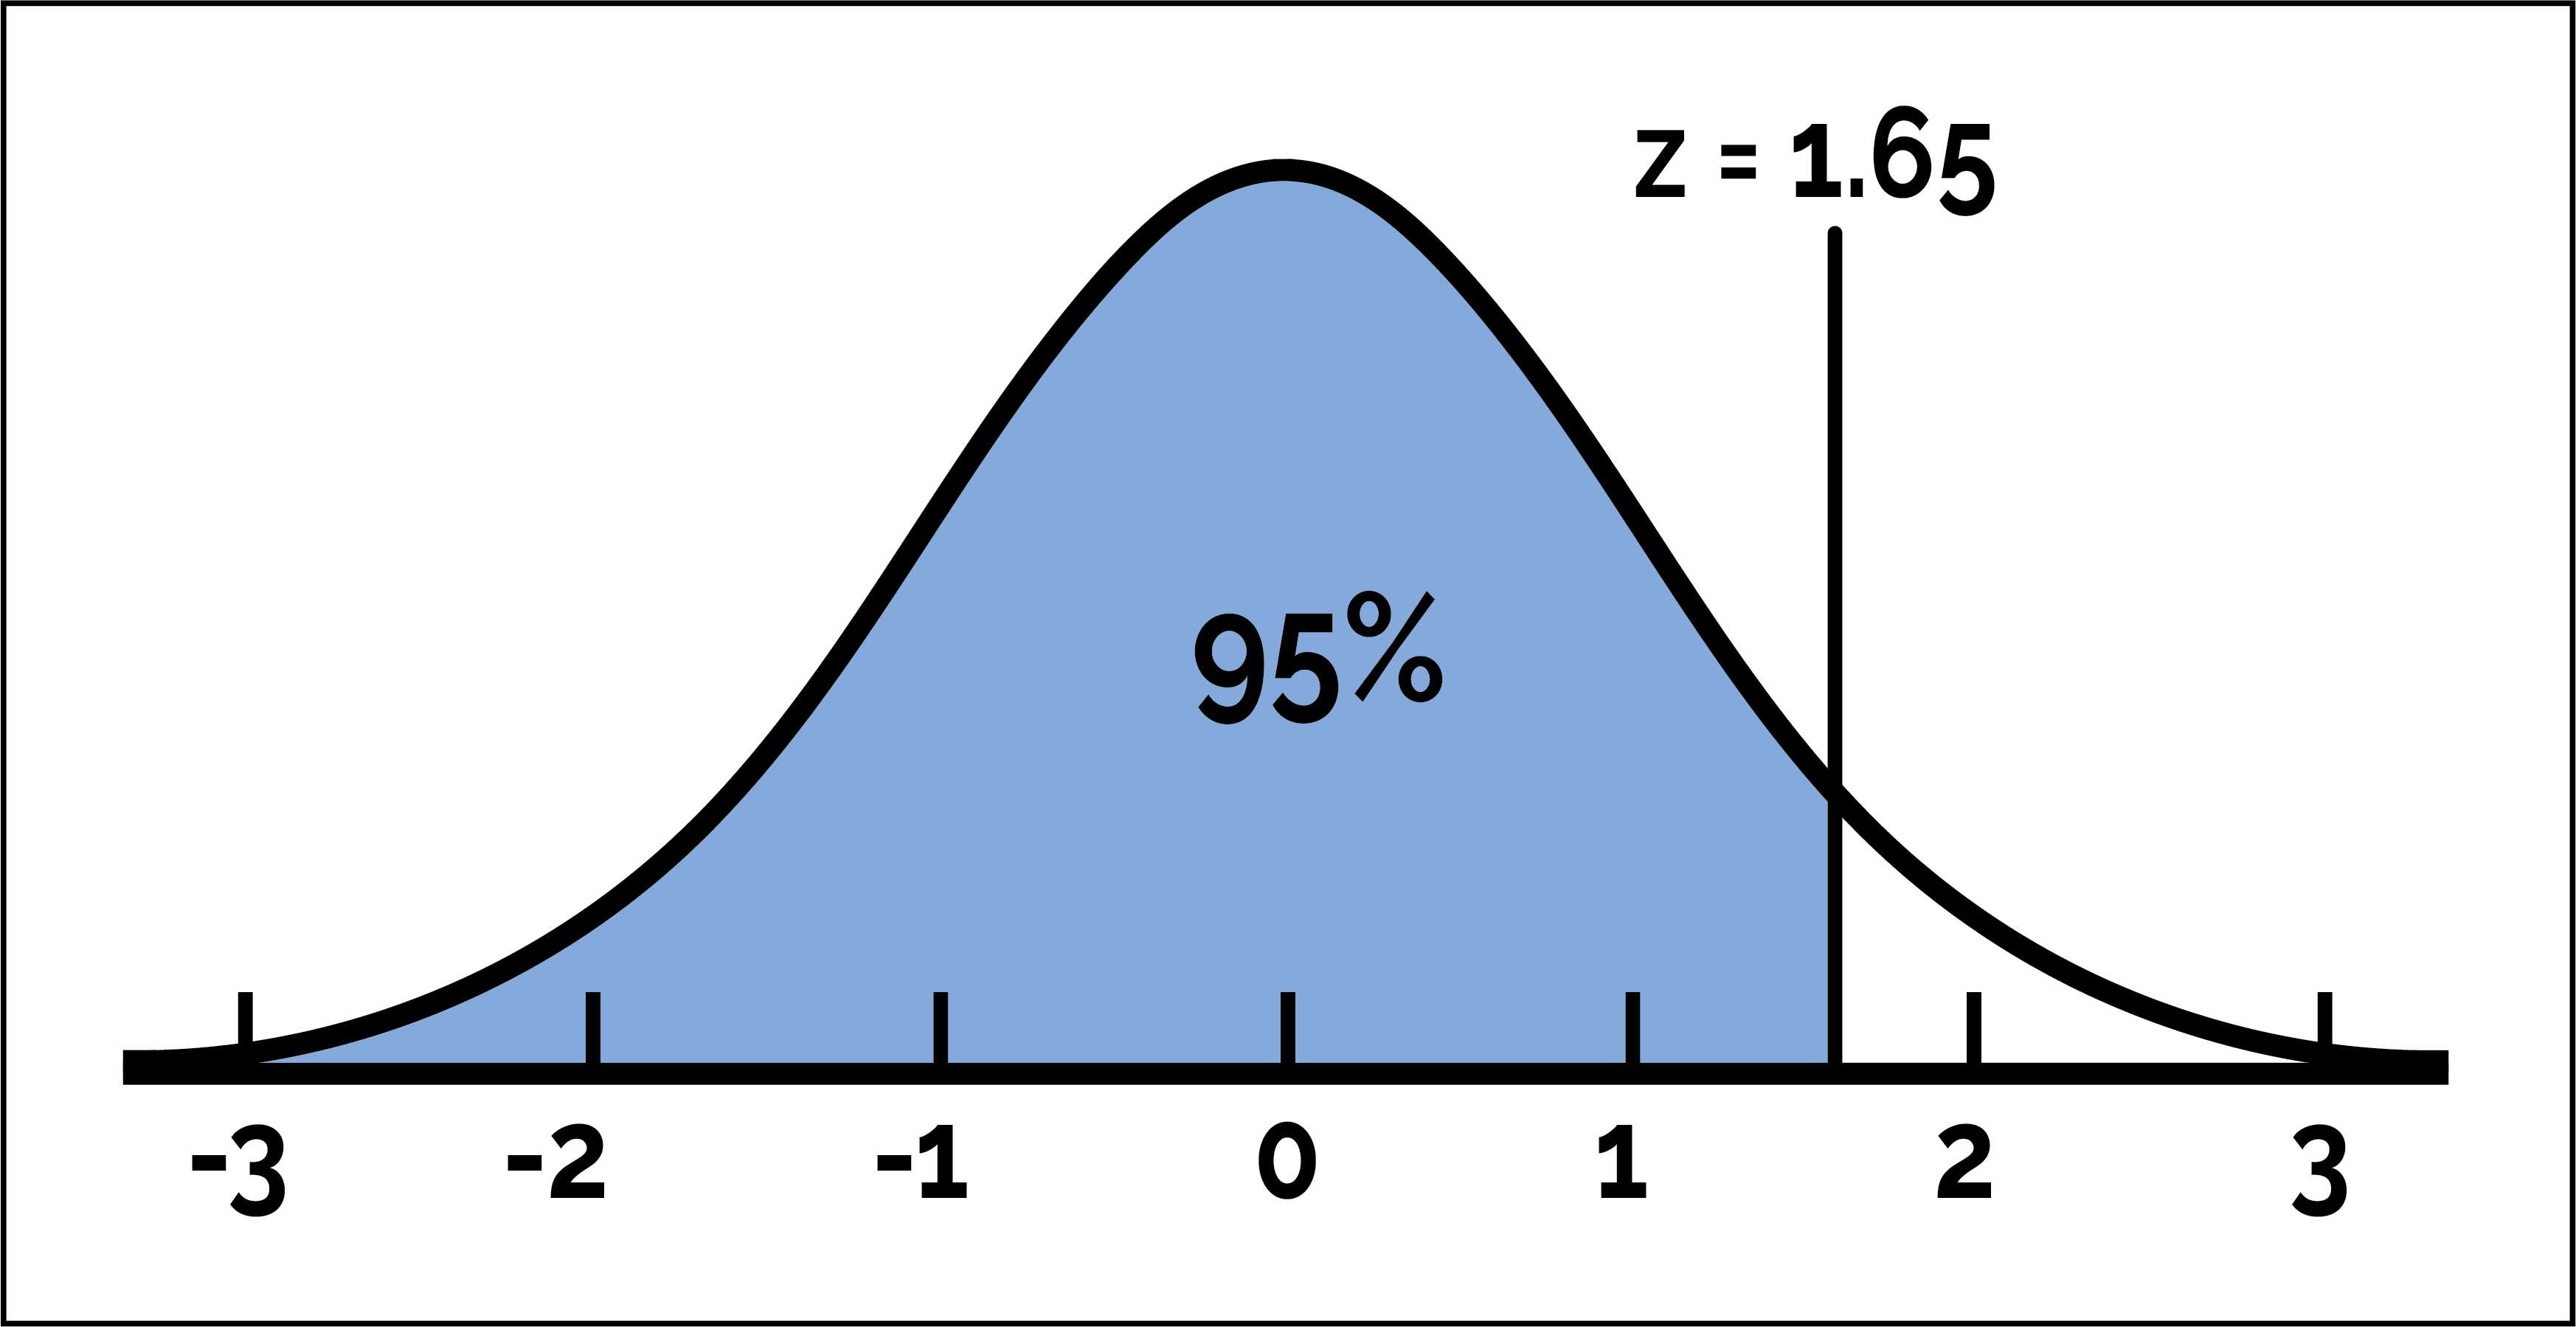 Solved For data with a bell-shaped (normal) distribution